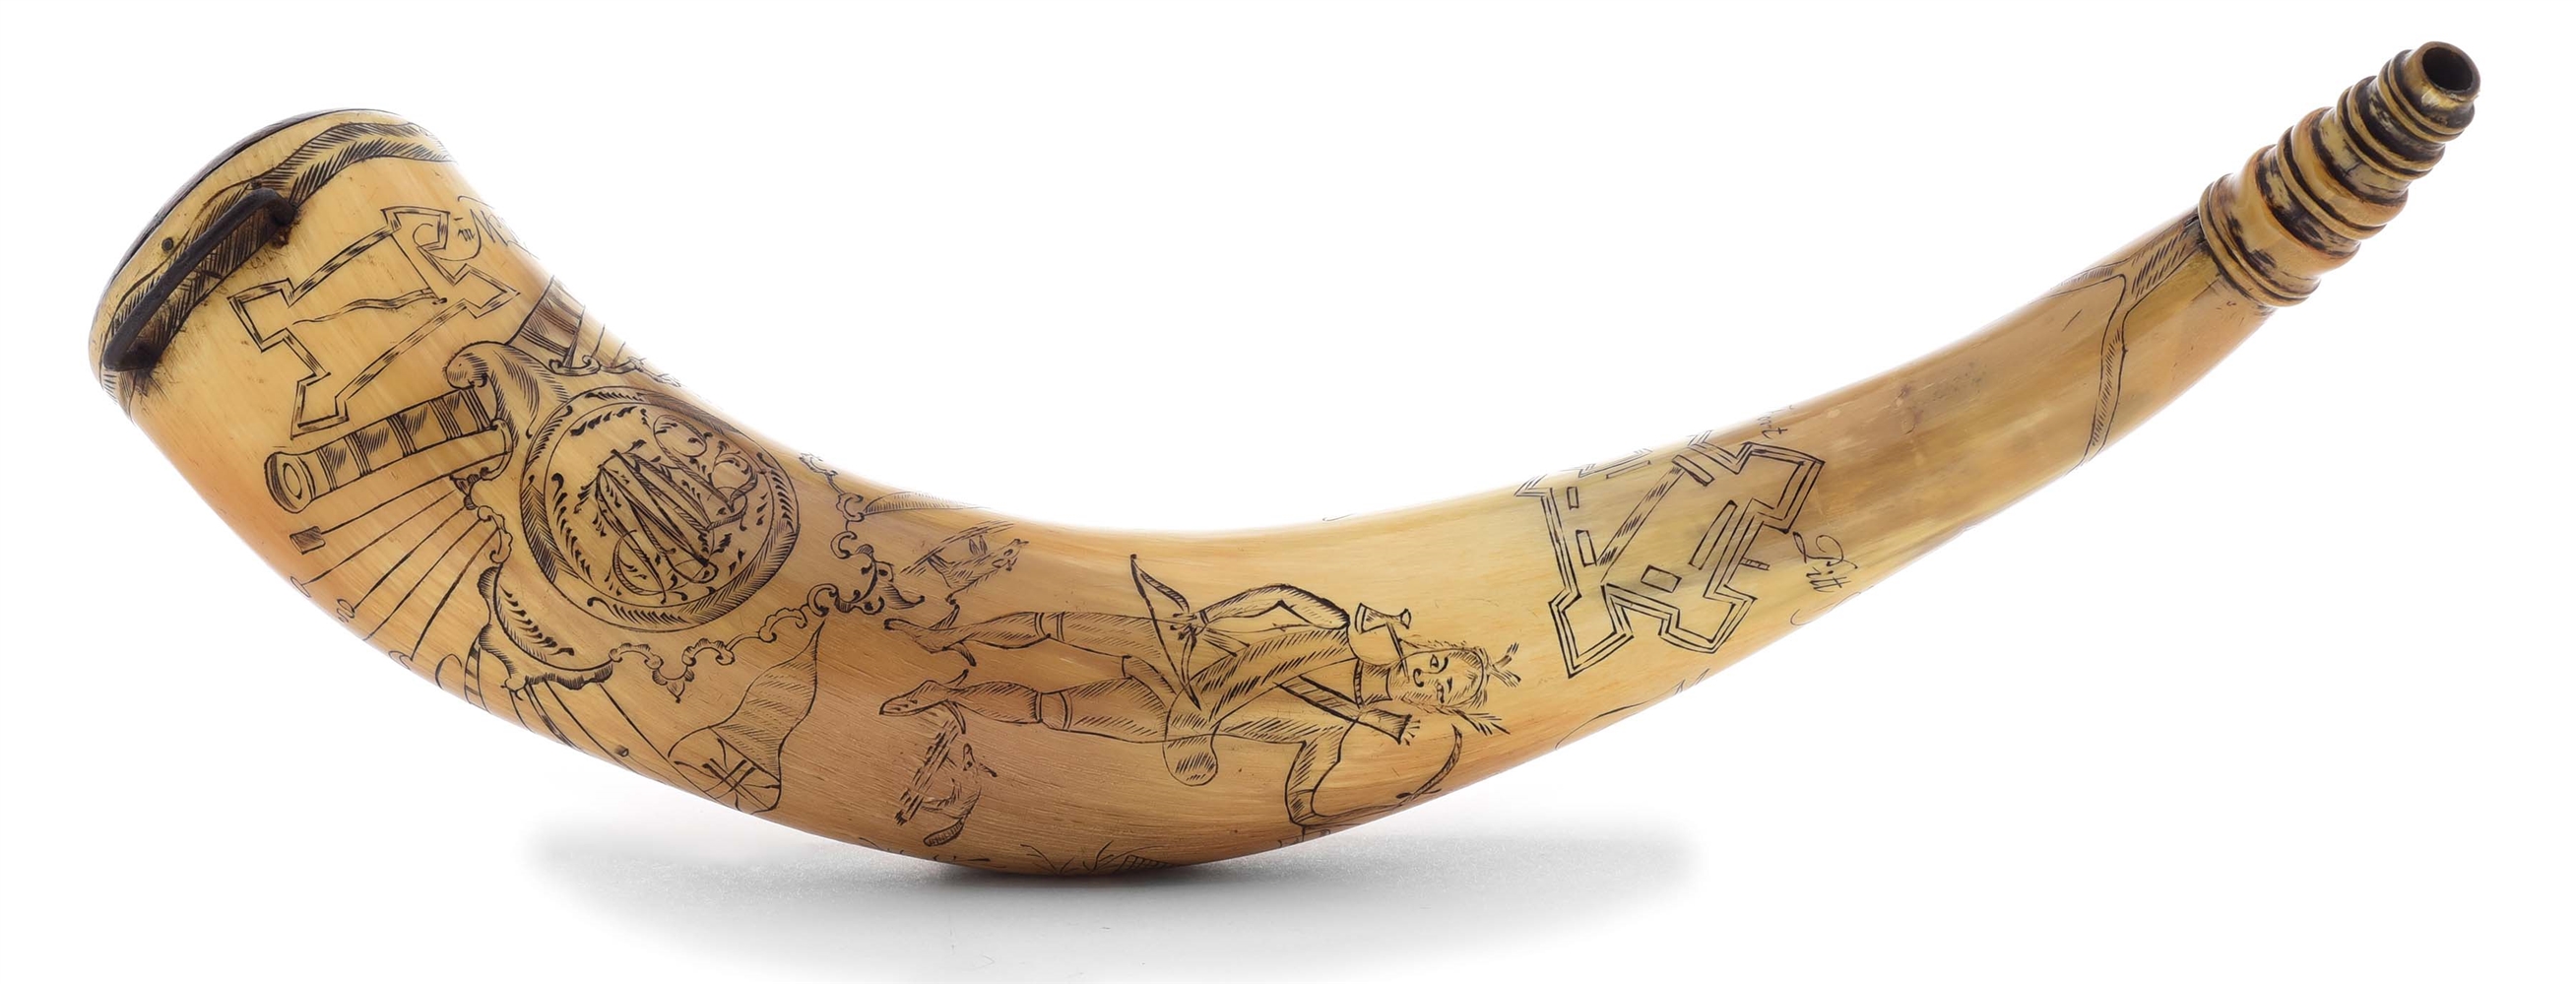 SCARCE ENGRAVED FORT PITT POWDER HORN FEATURING INDIANS, ATTRIBUTED TO JOHN SMALL.